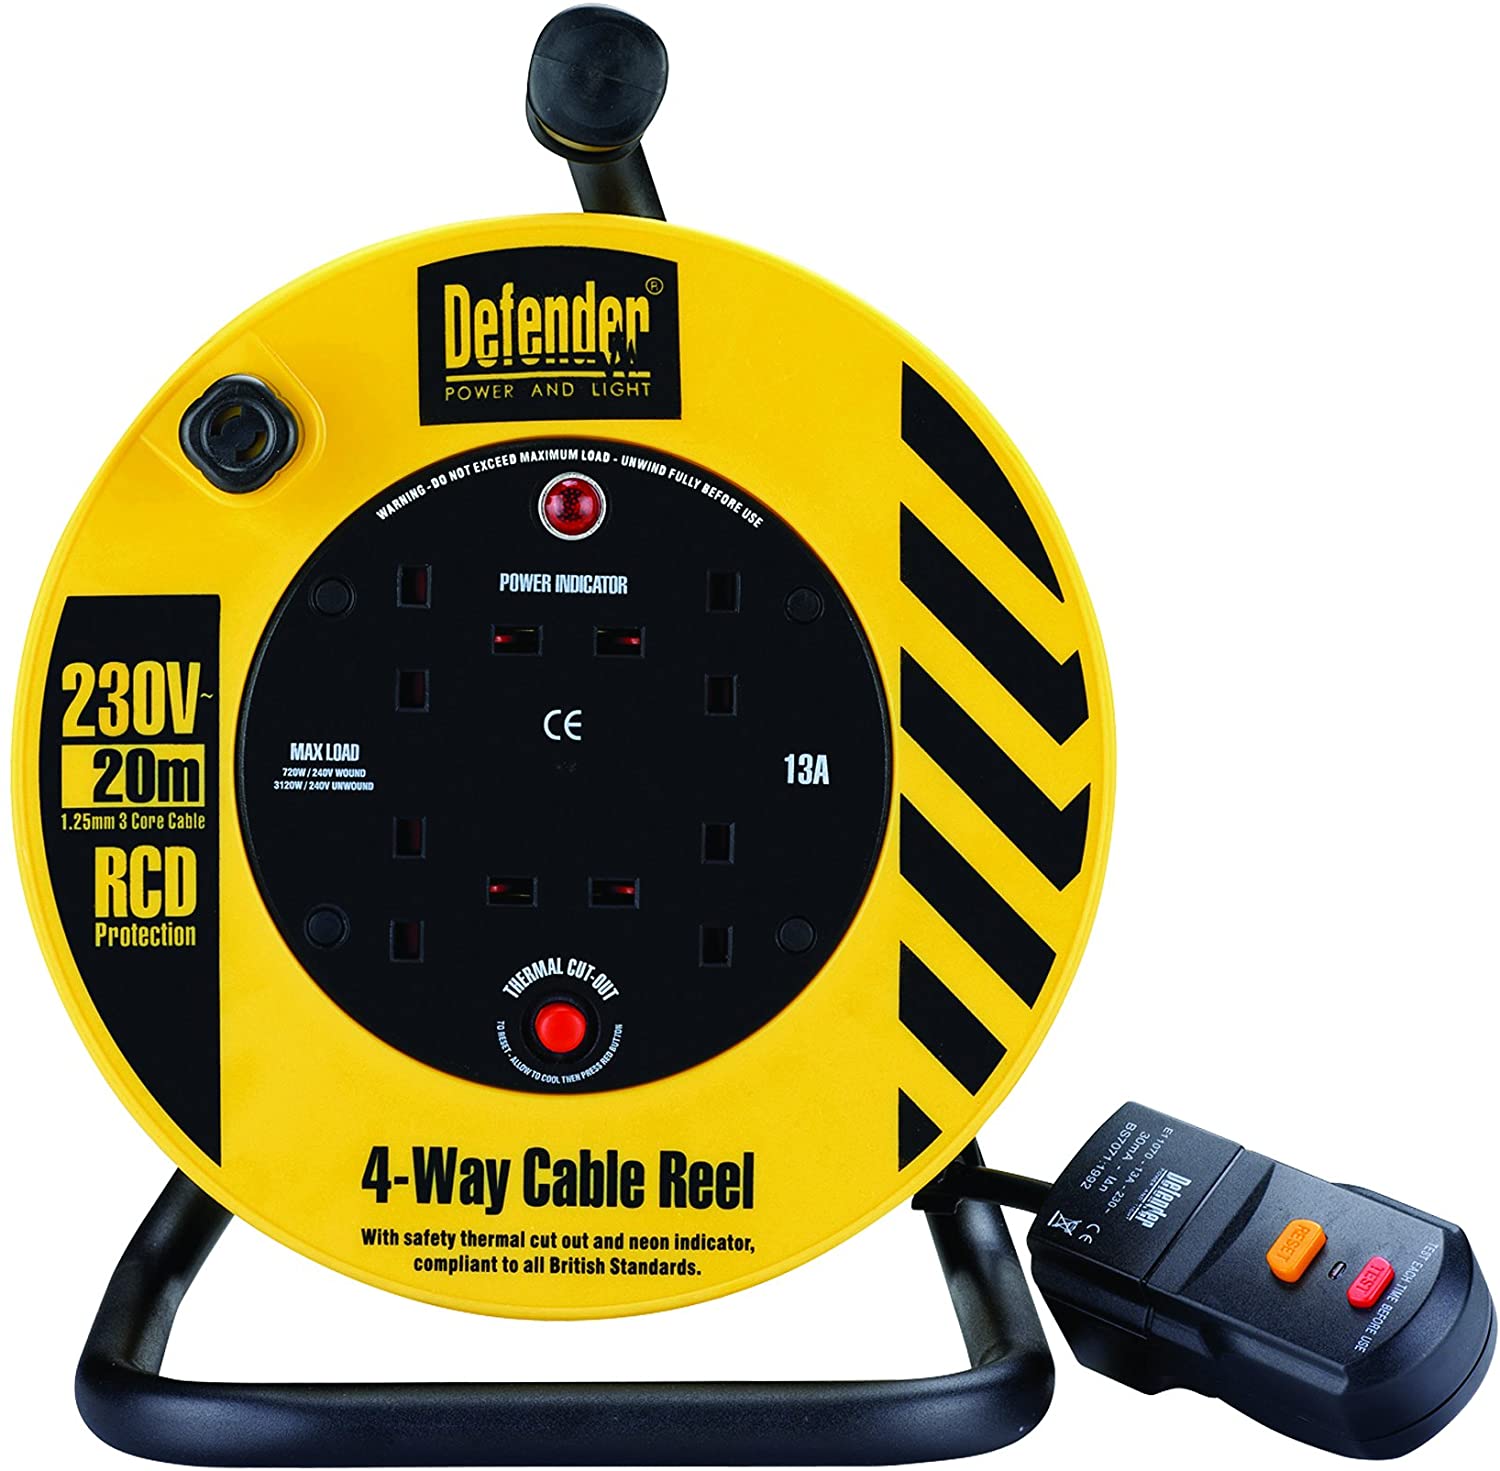 Defender 20m 1.25mm Light Industrial Cable Reel 240V 13A with RCD